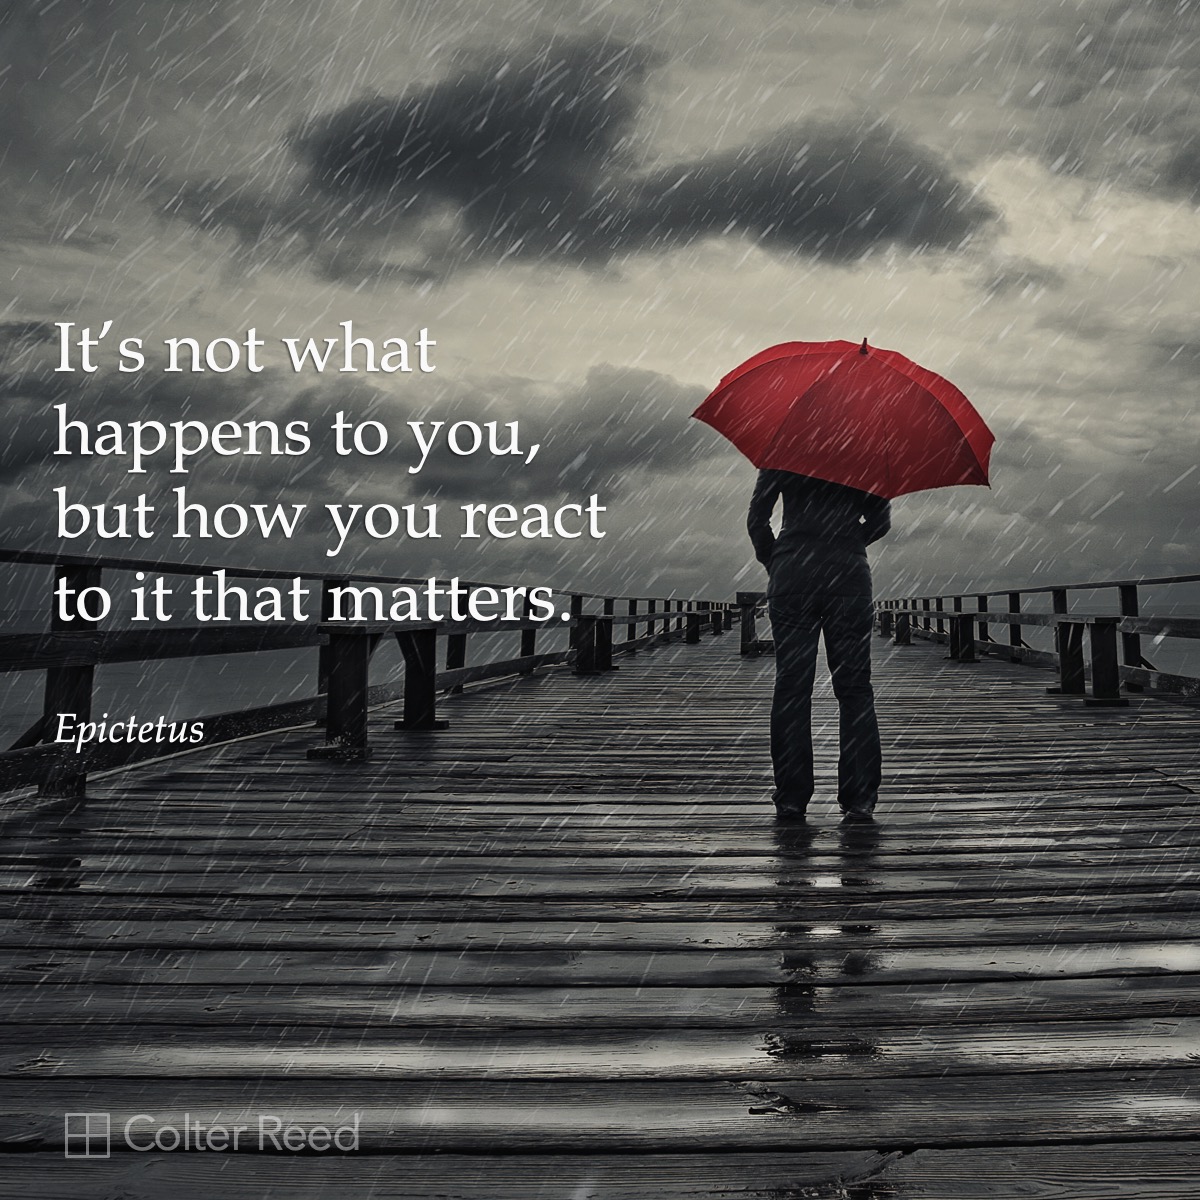 It’s not what happens to you, but how you react to it that matters. —Epictetus